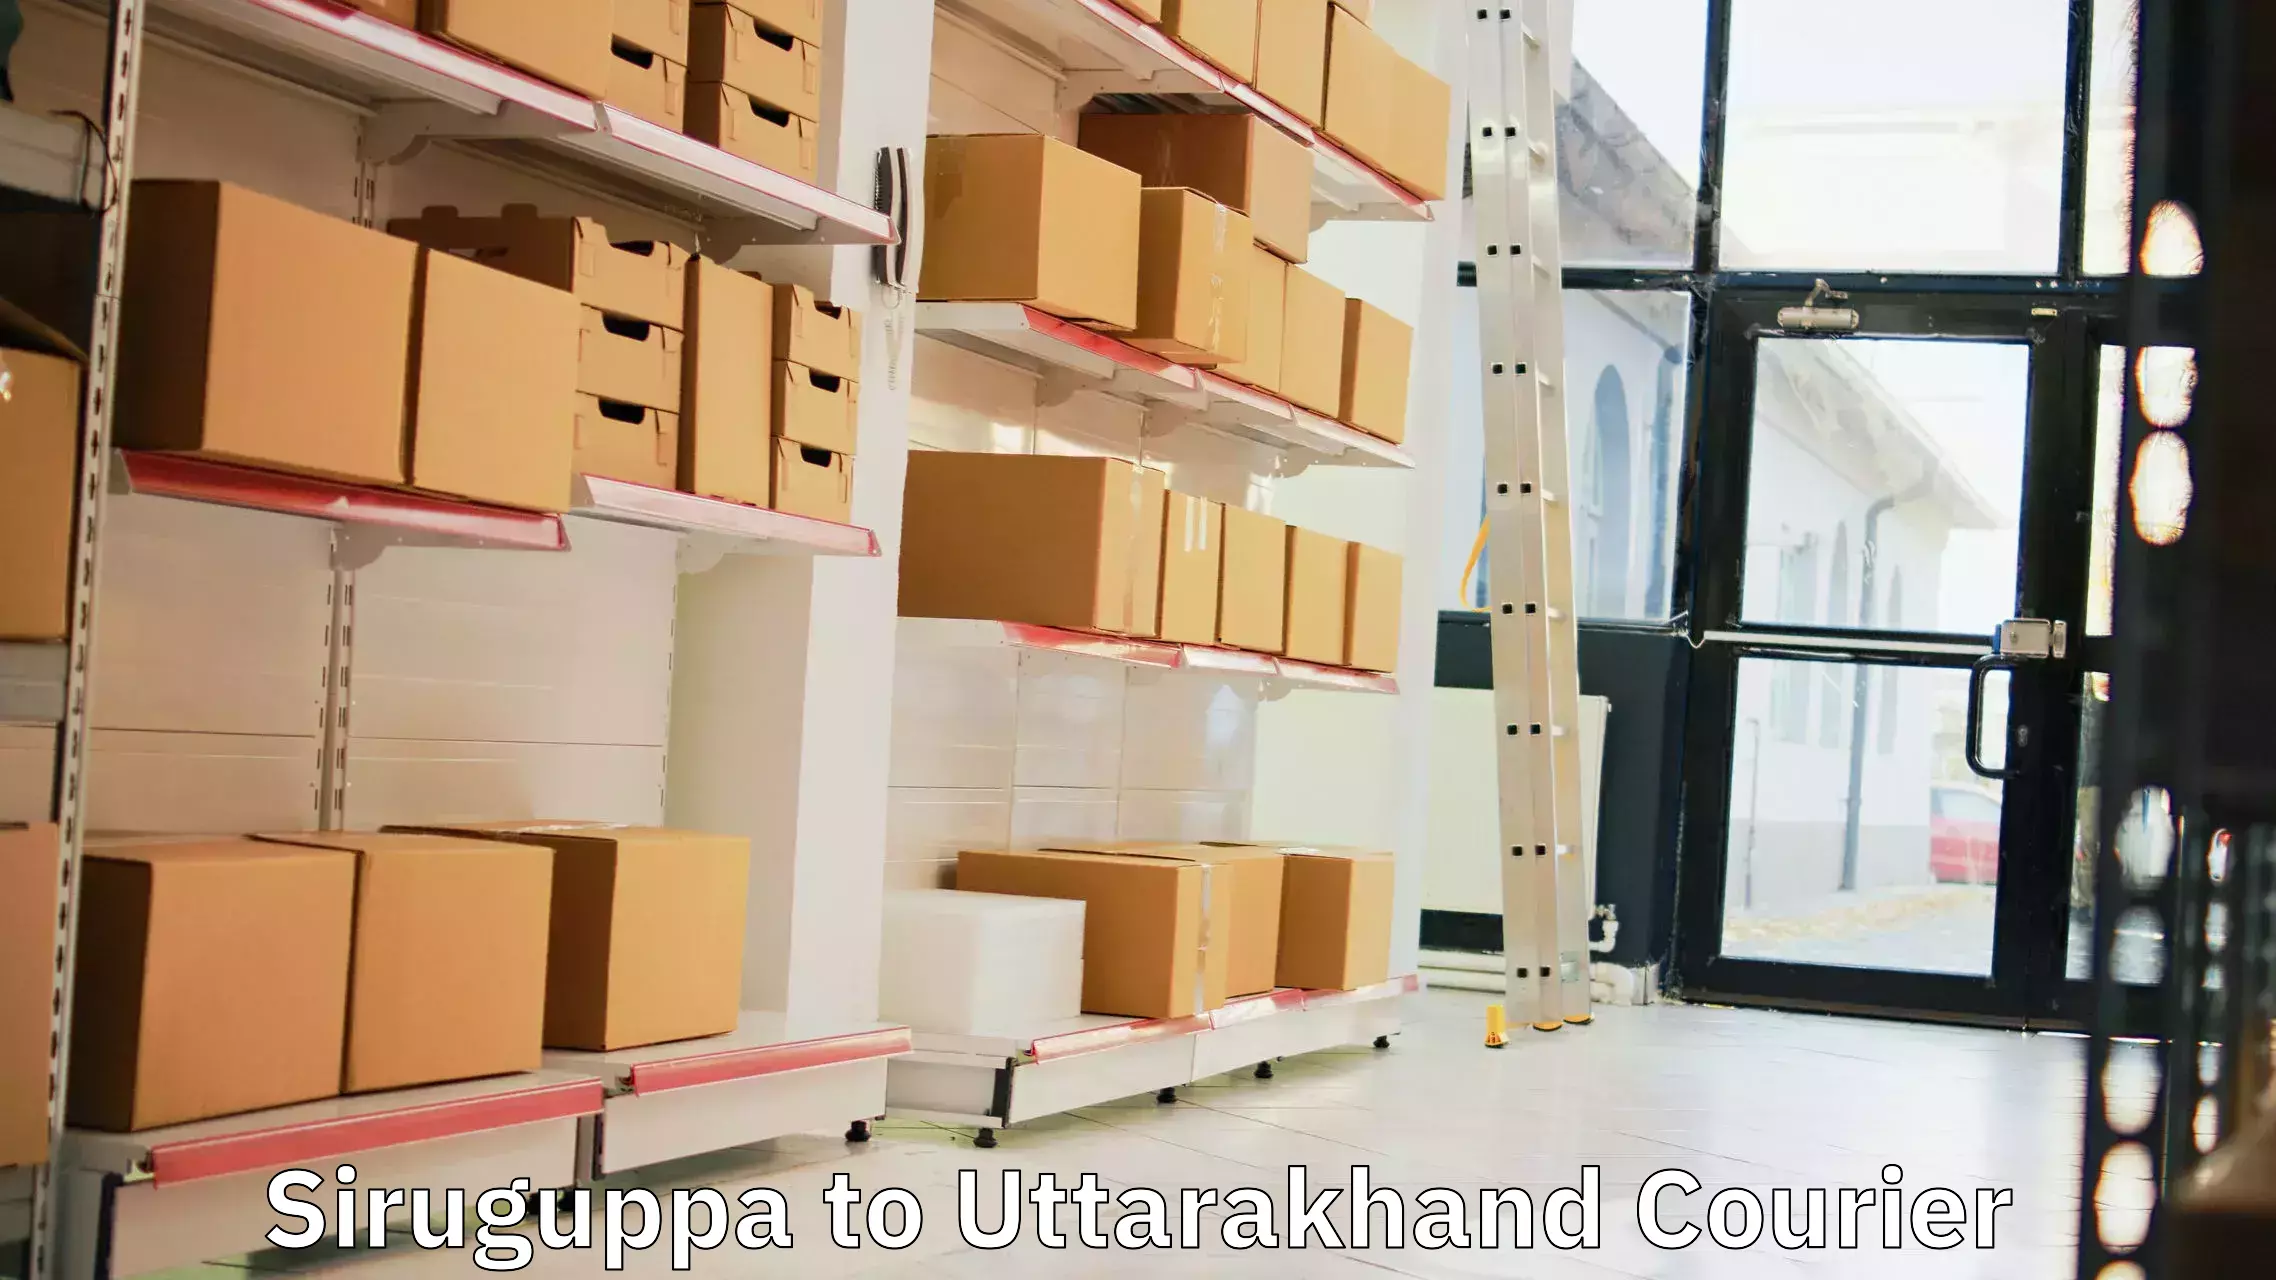 Courier dispatch services in Siruguppa to Roorkee